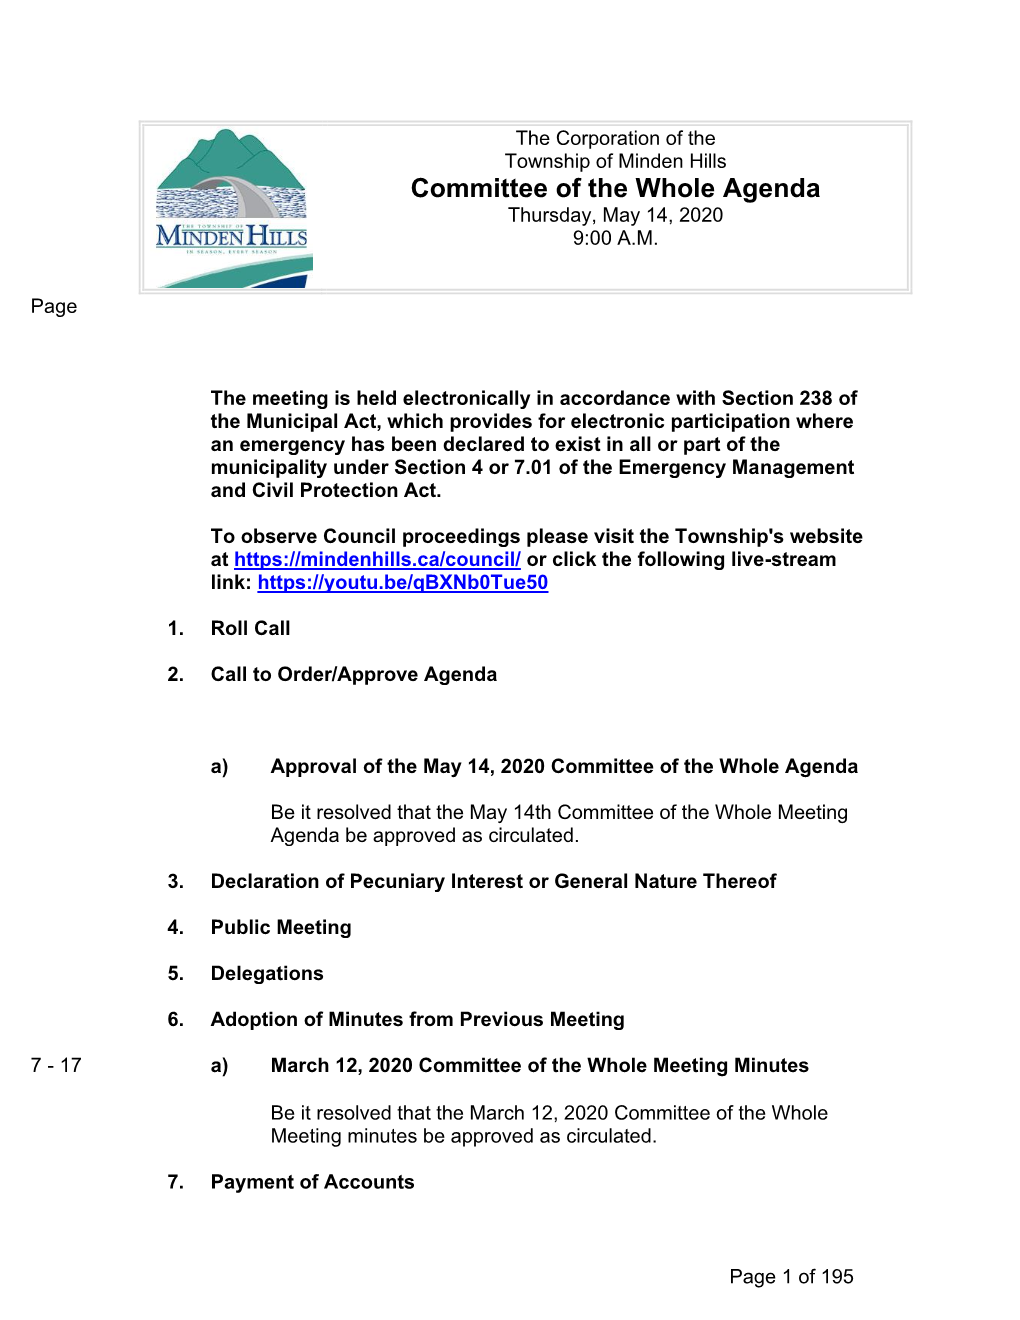 Minden Hills Committee of the Whole Agenda Thursday, May 14, 2020 9:00 A.M